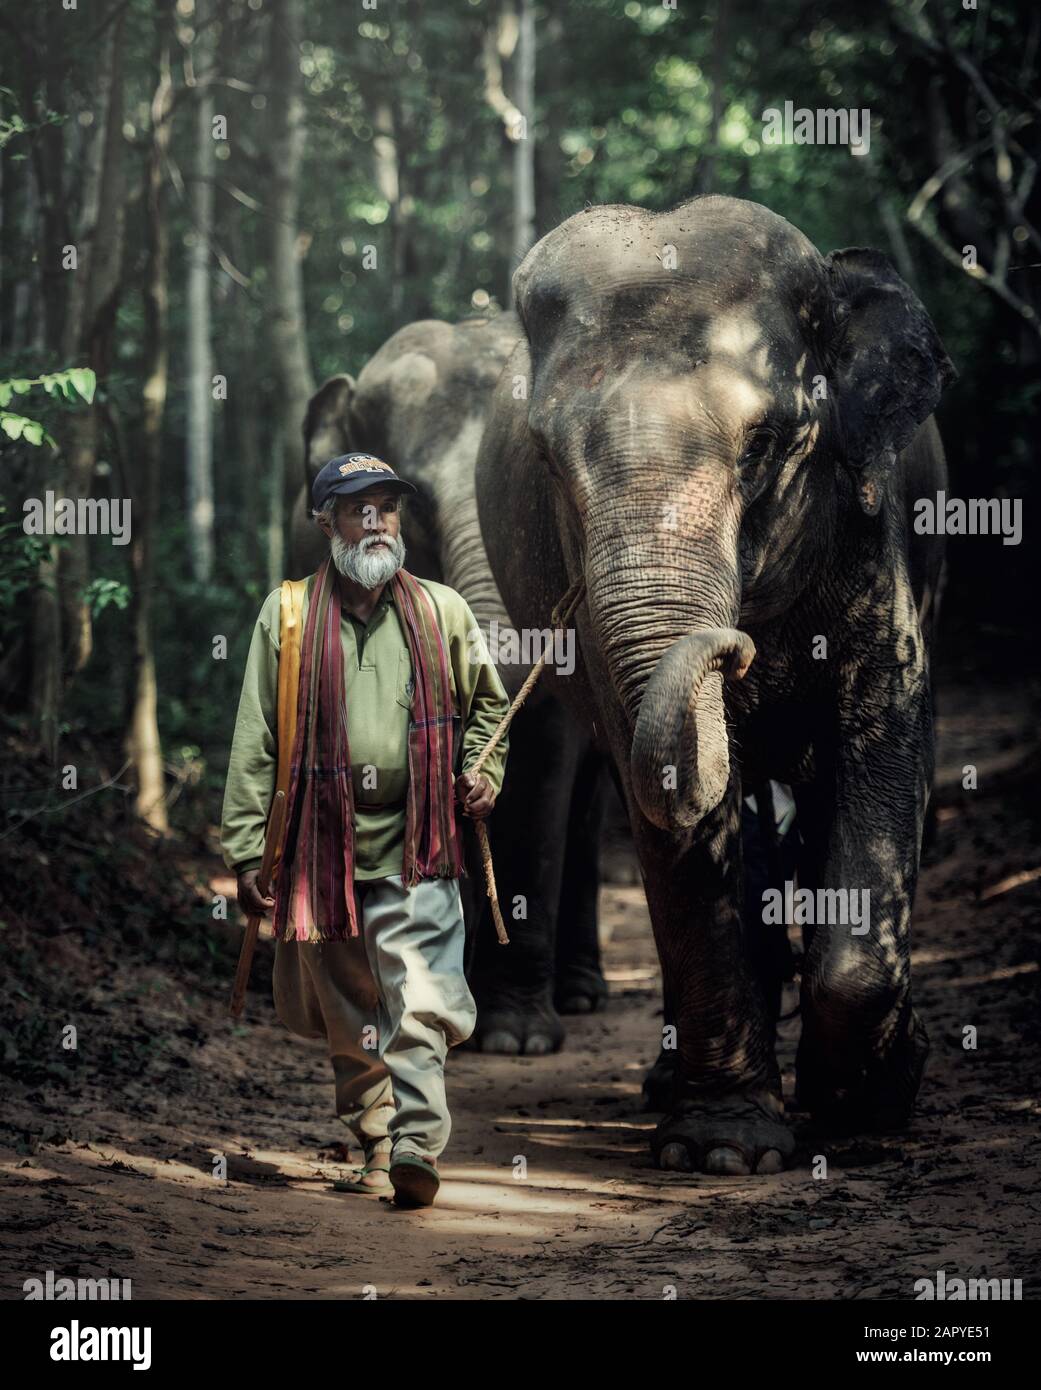 SURIN, THAILAND - OCT 23, 2015: A mahout walking with his elephant to go back home after bathing his elephant at a local lake. Ban Ta Klang is a well- Stock Photo